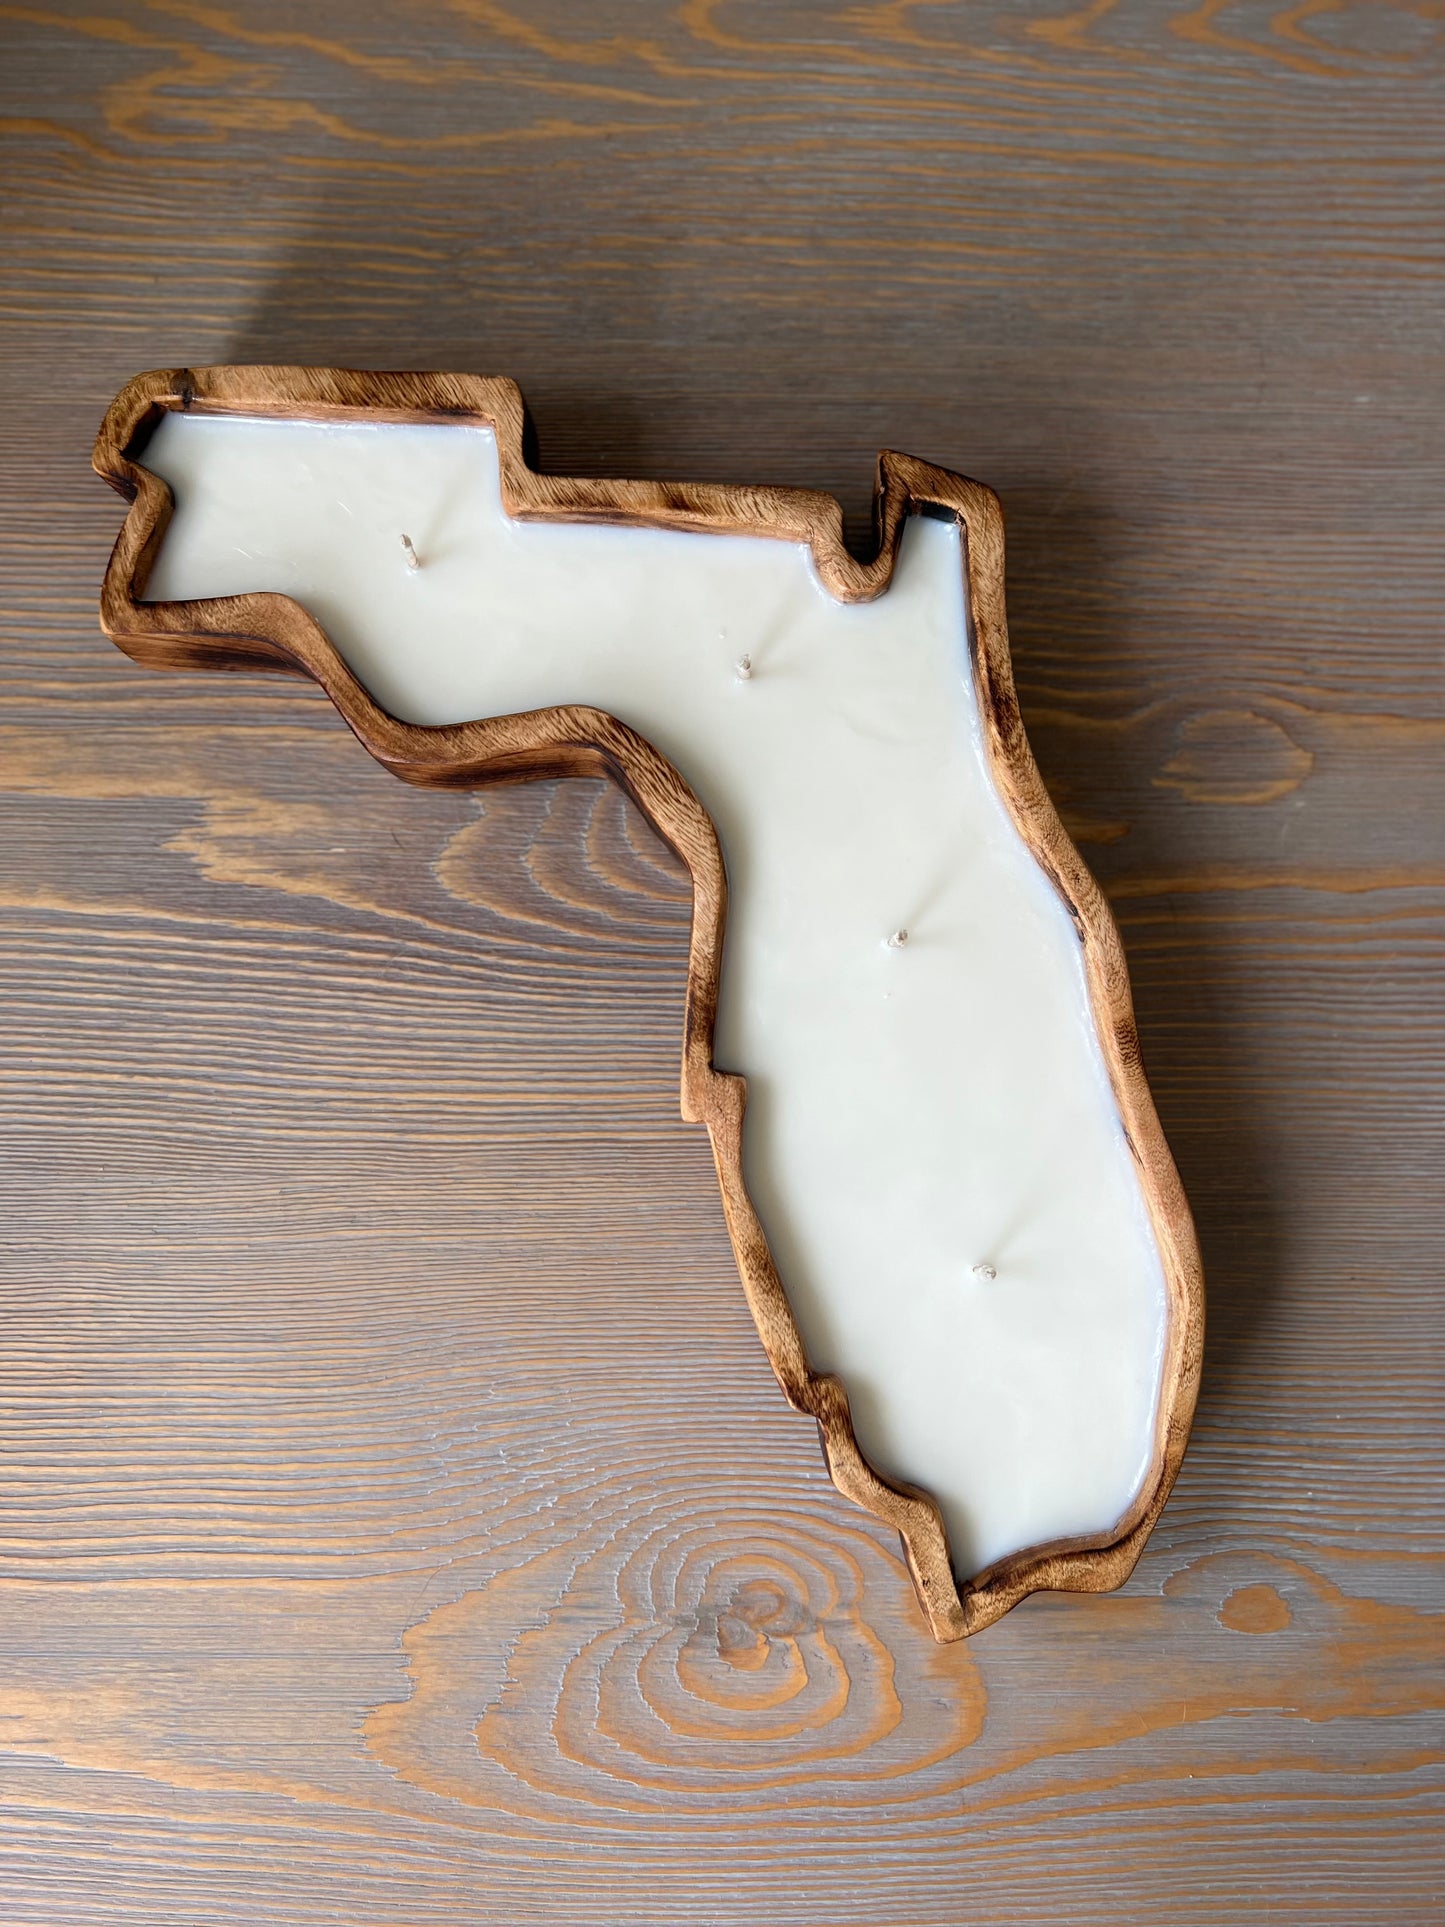 State of Florida Wooden Soy Wax Candle